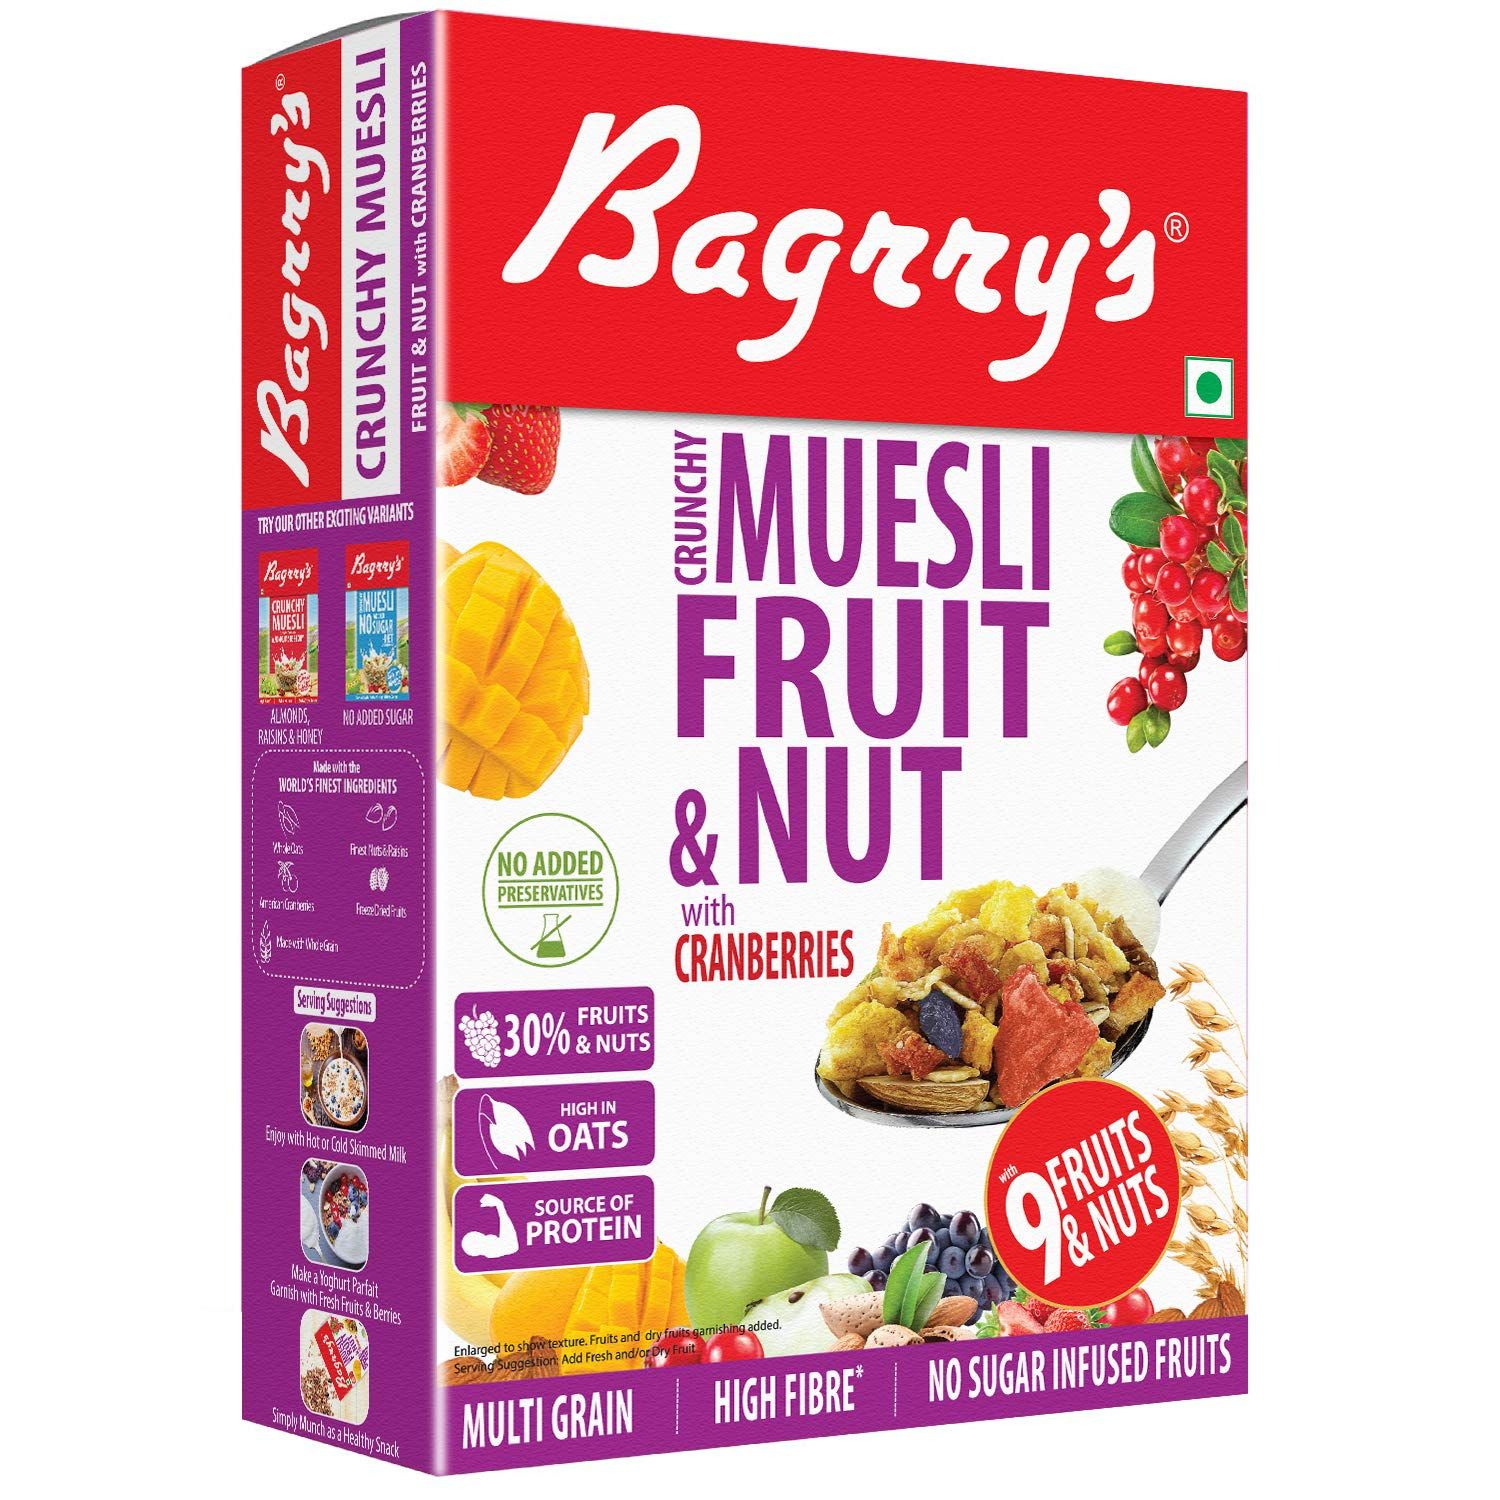 Bagrry's Crunchy Fruit And Nut Muesli With Cranberries Image